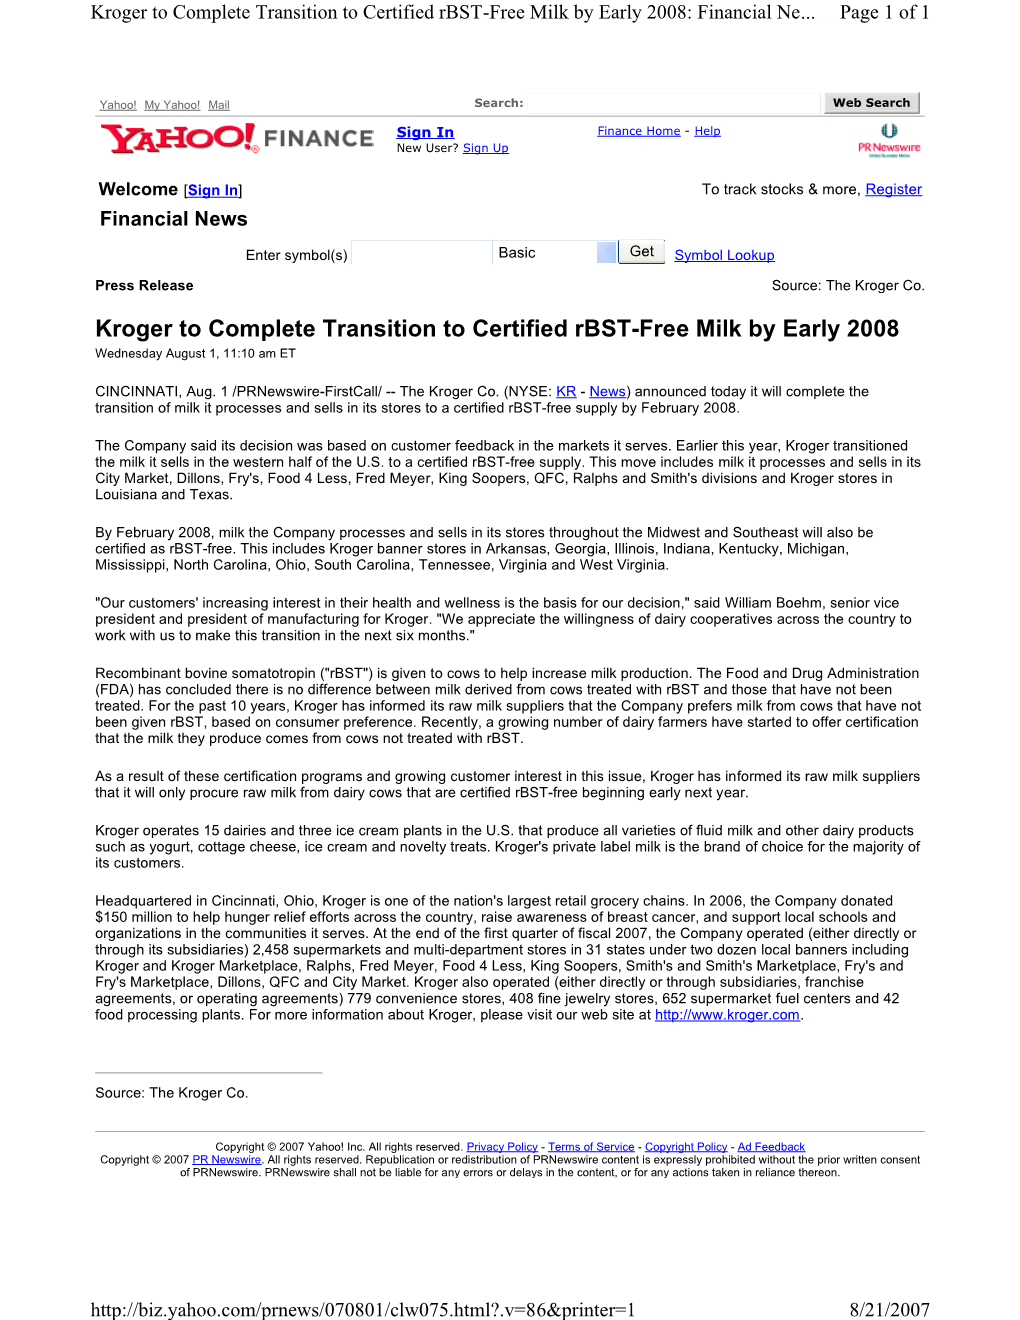 Kroger to Complete Transition to Certified Rbst-Free Milk by Early 2008 Wednesday August 1, 11:10 Am ET